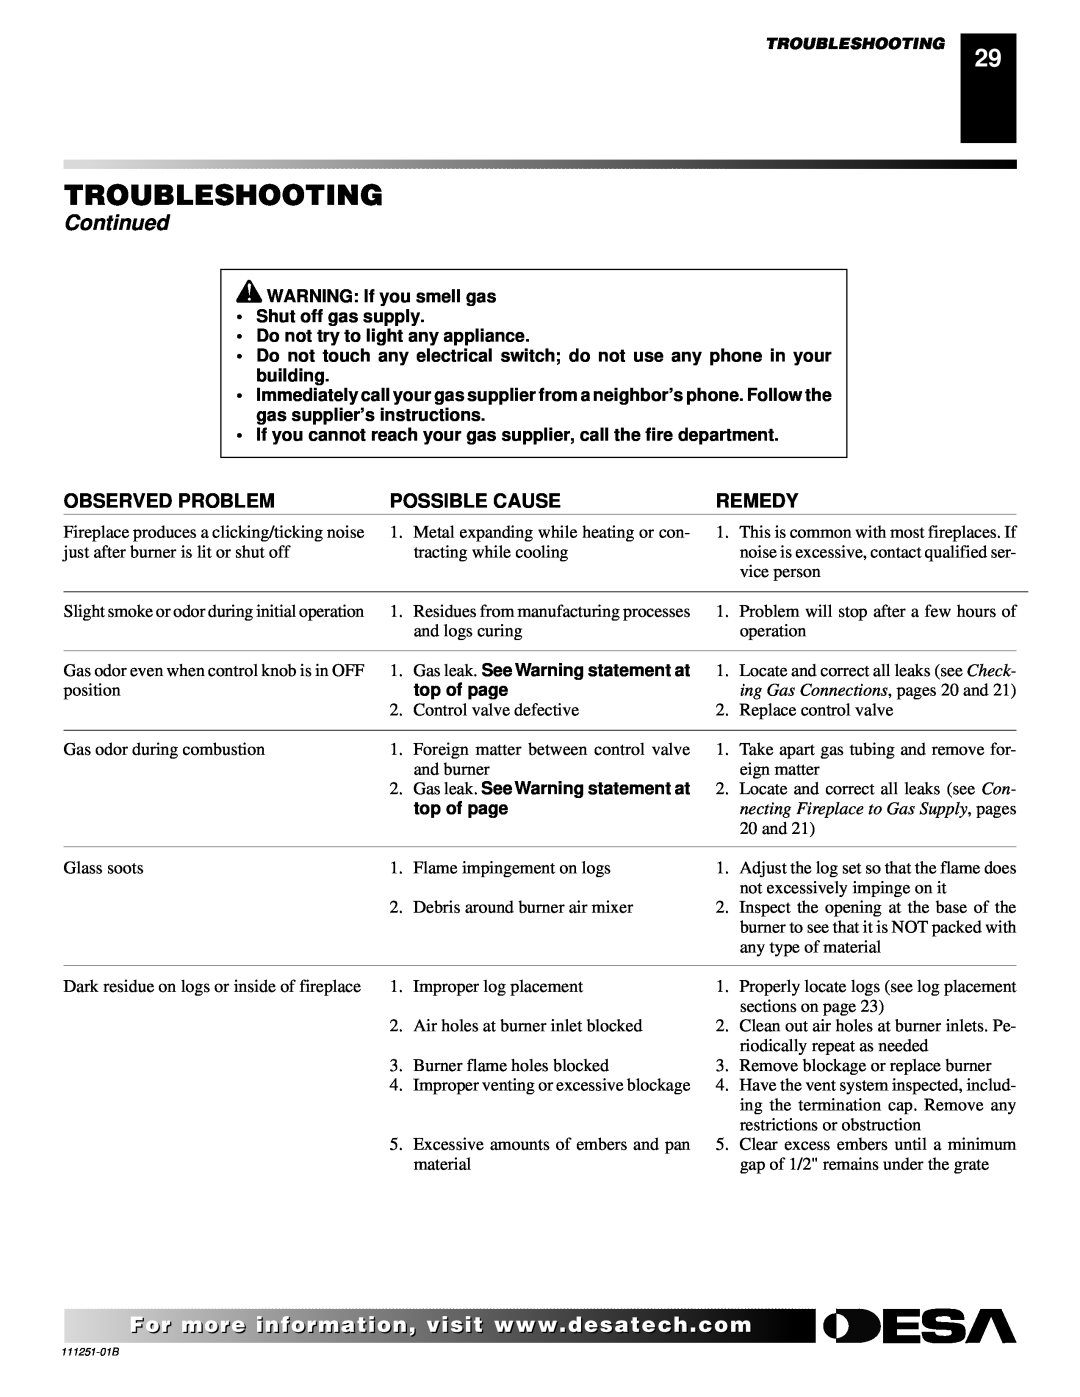 Desa (V)T36ENA Troubleshooting, Continued, Observed Problem, Possible Cause, Remedy, ing Gas Connections, pages 20 and 